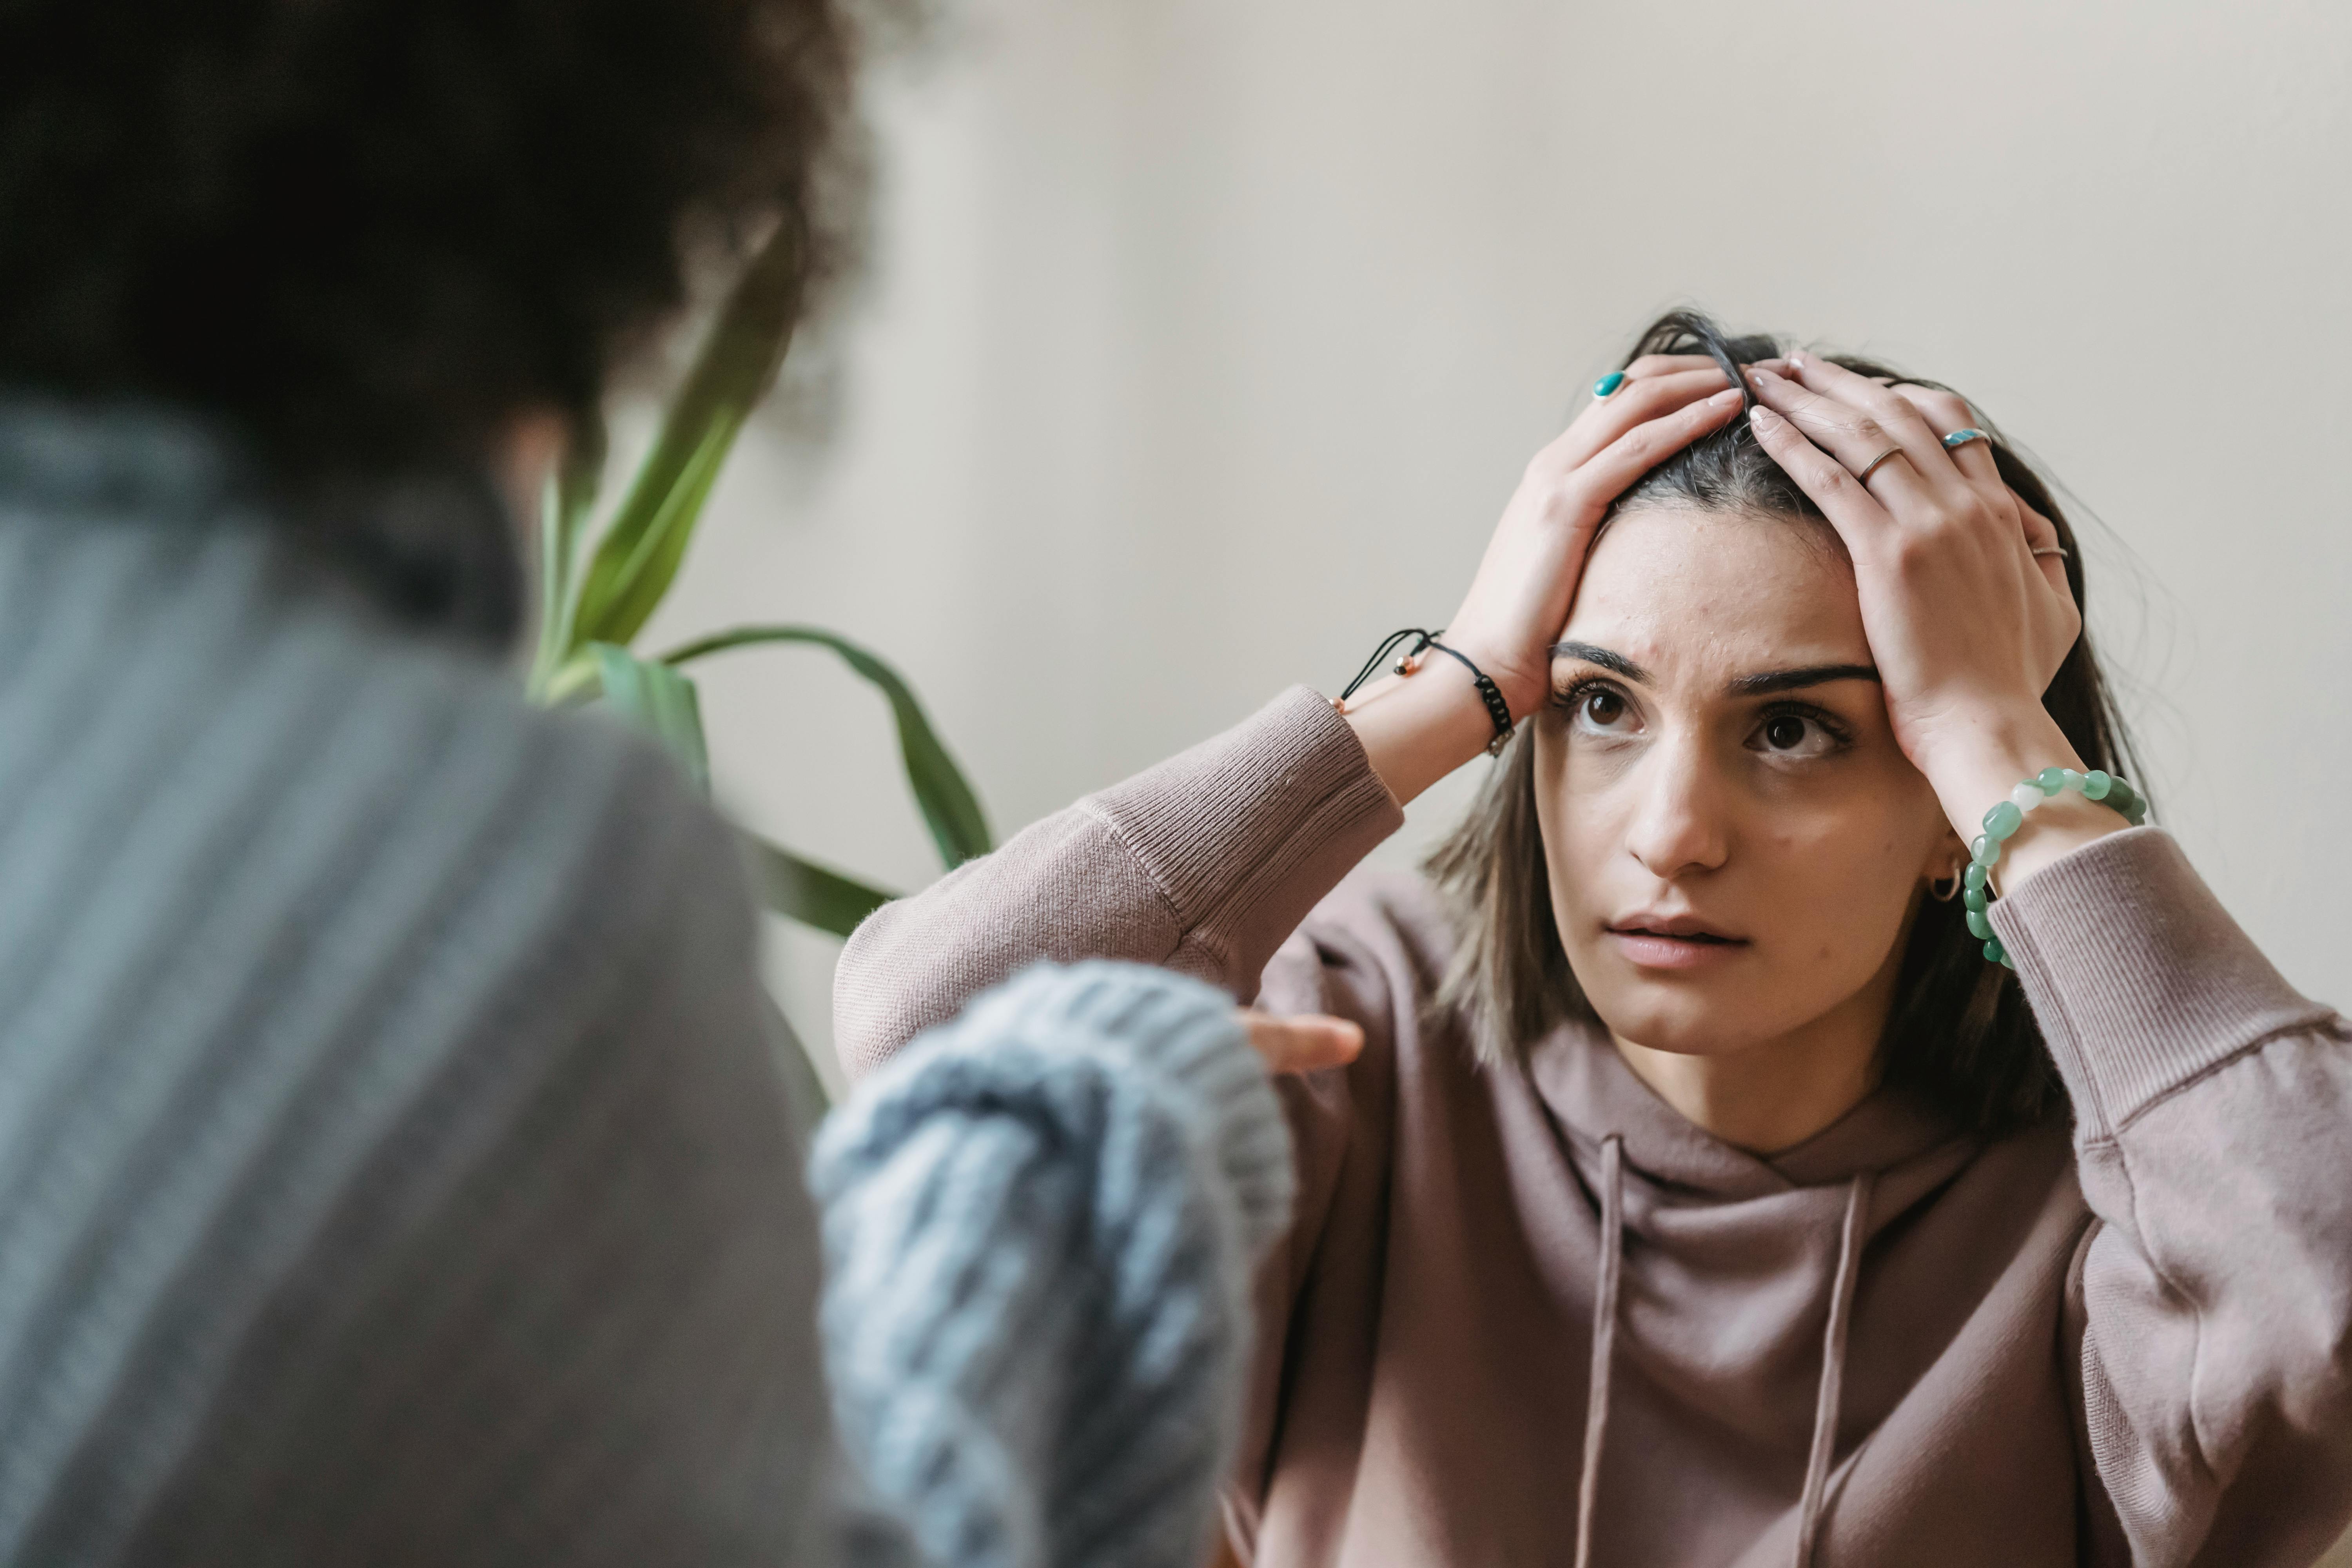 An upset woman listening to someone talk | Source: Pexels